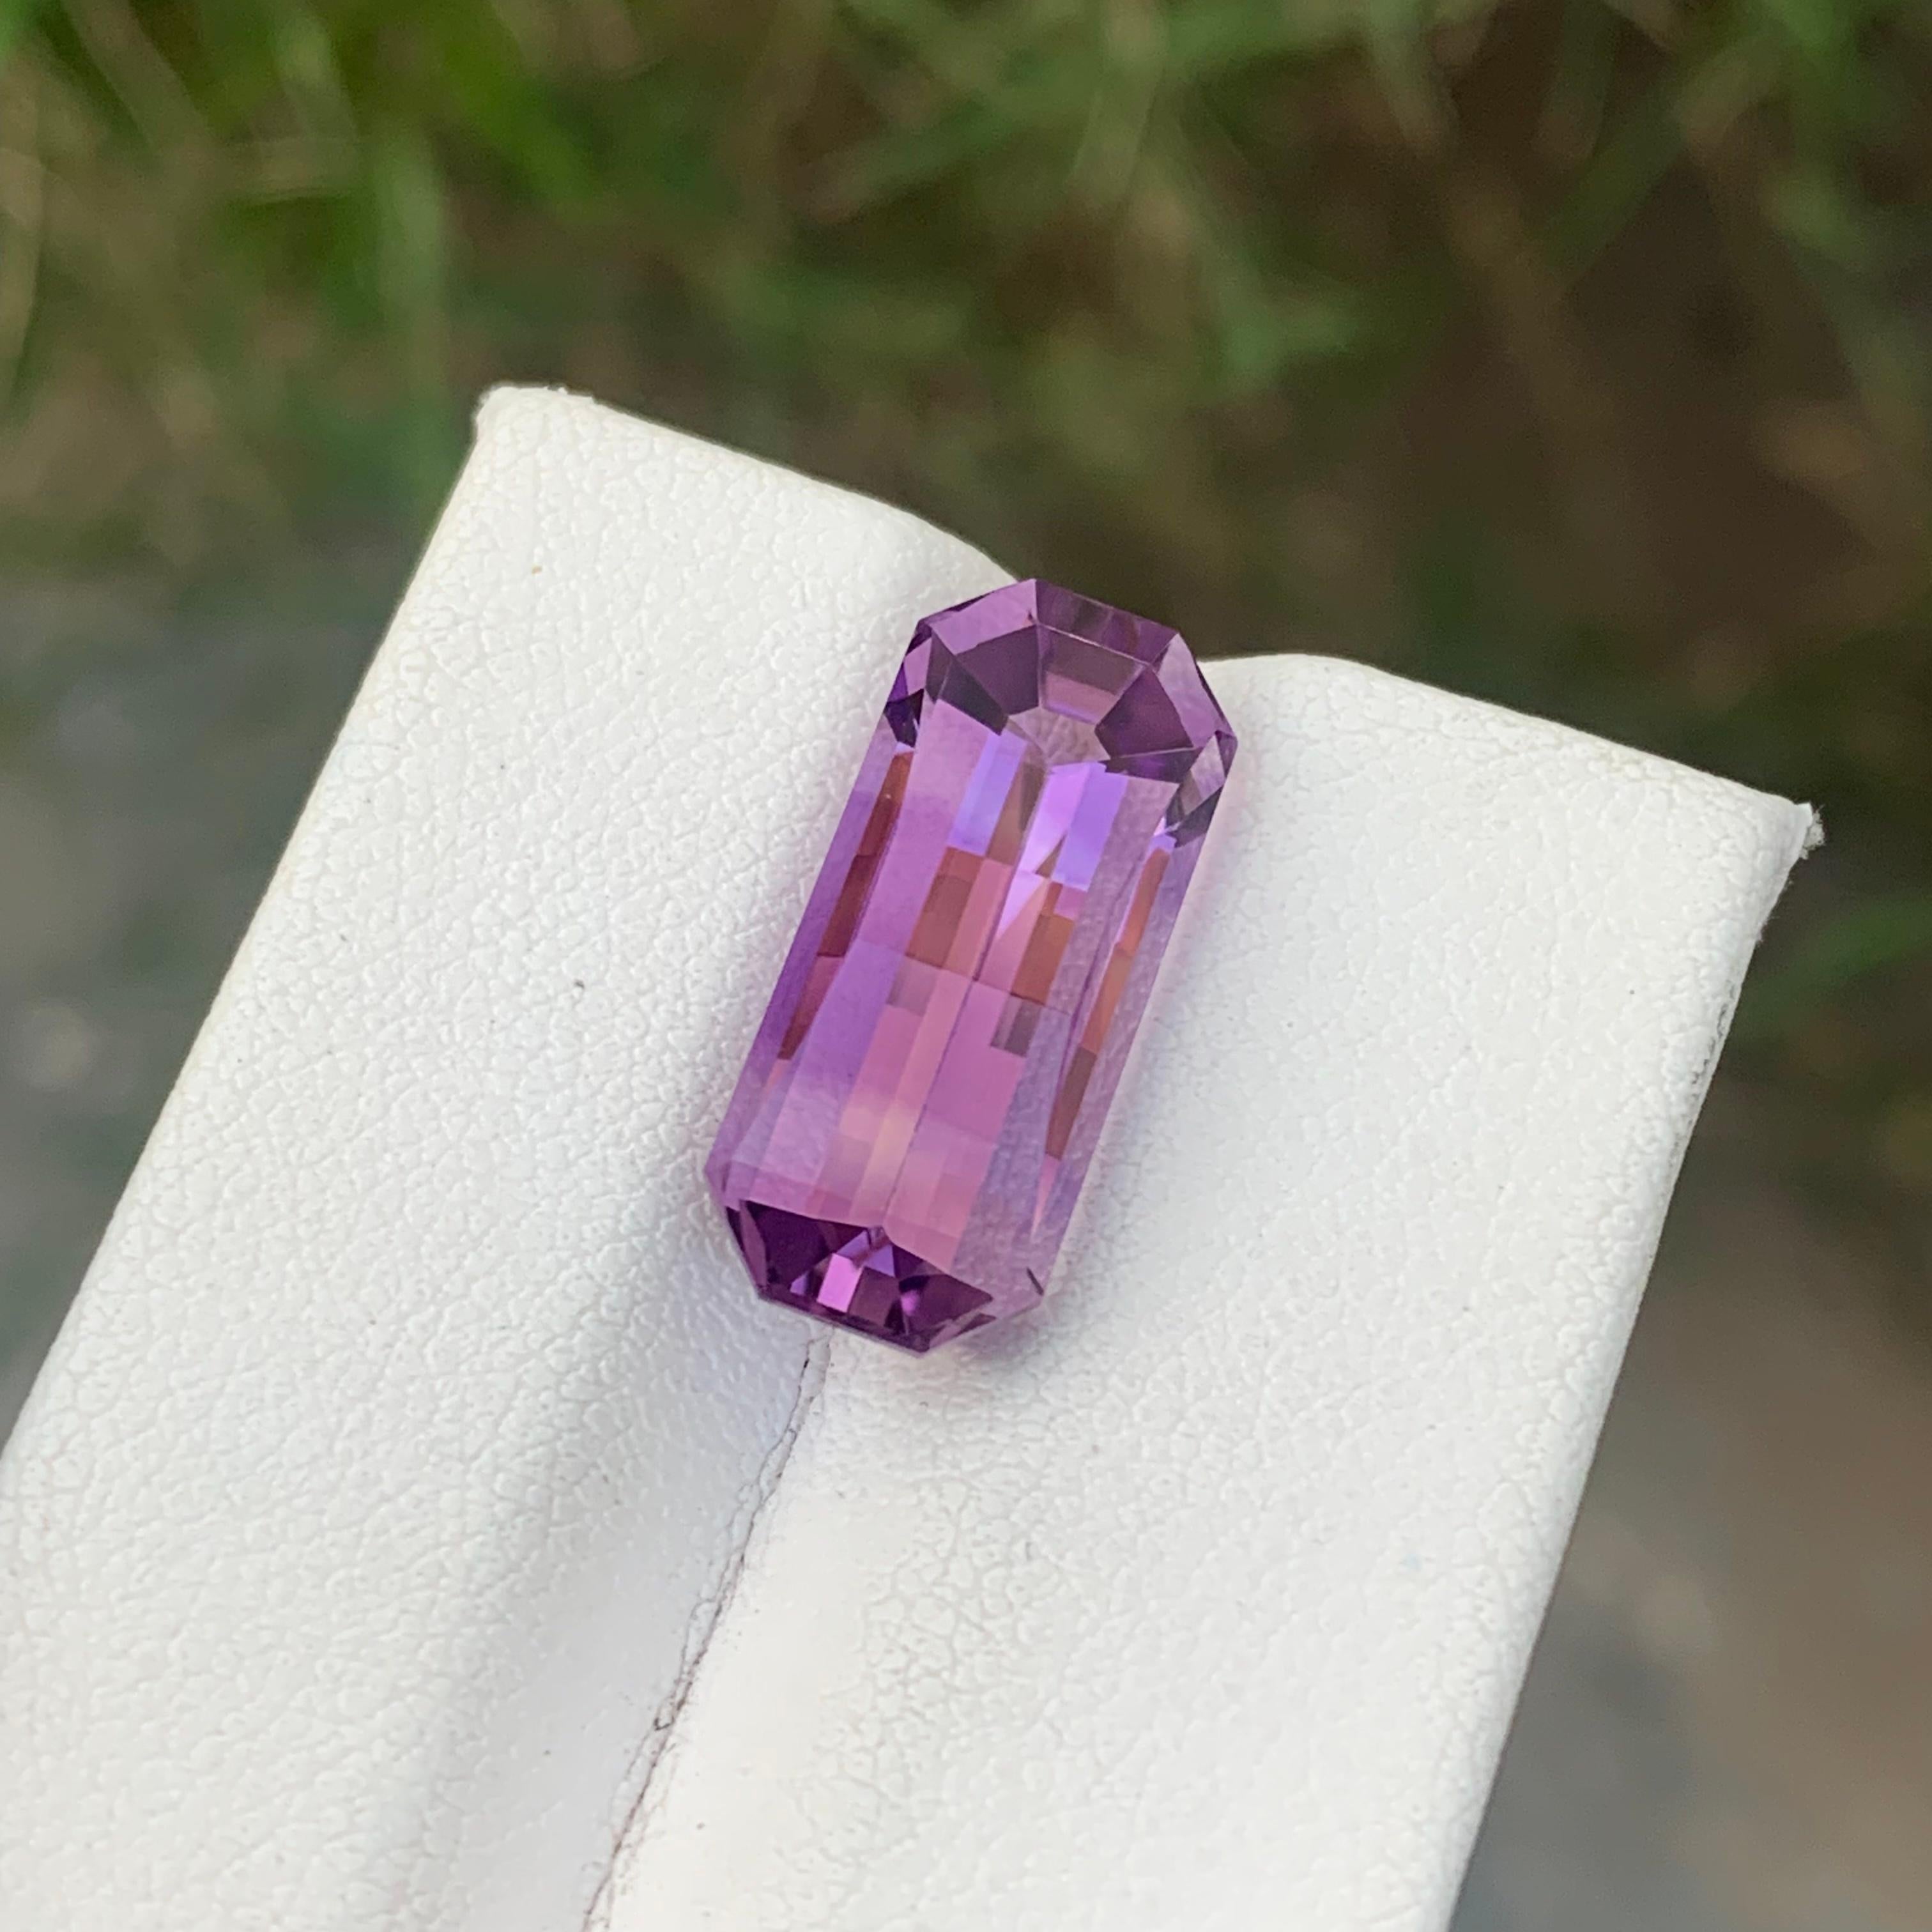 Faceted Amethyst 
Weight: 8.25 Carats 
Dimension: 18.9x8.1x7.6 Mm
Origin: Brazil
Color: Purple 
Shape: Rectangle/Emerald 
Facet/Cut: Pixel Cut / Smith Bar Cut / Pixelated 
Treatment: Non
Certficate: On Customer Demand
.
Amethyst is a stunning and